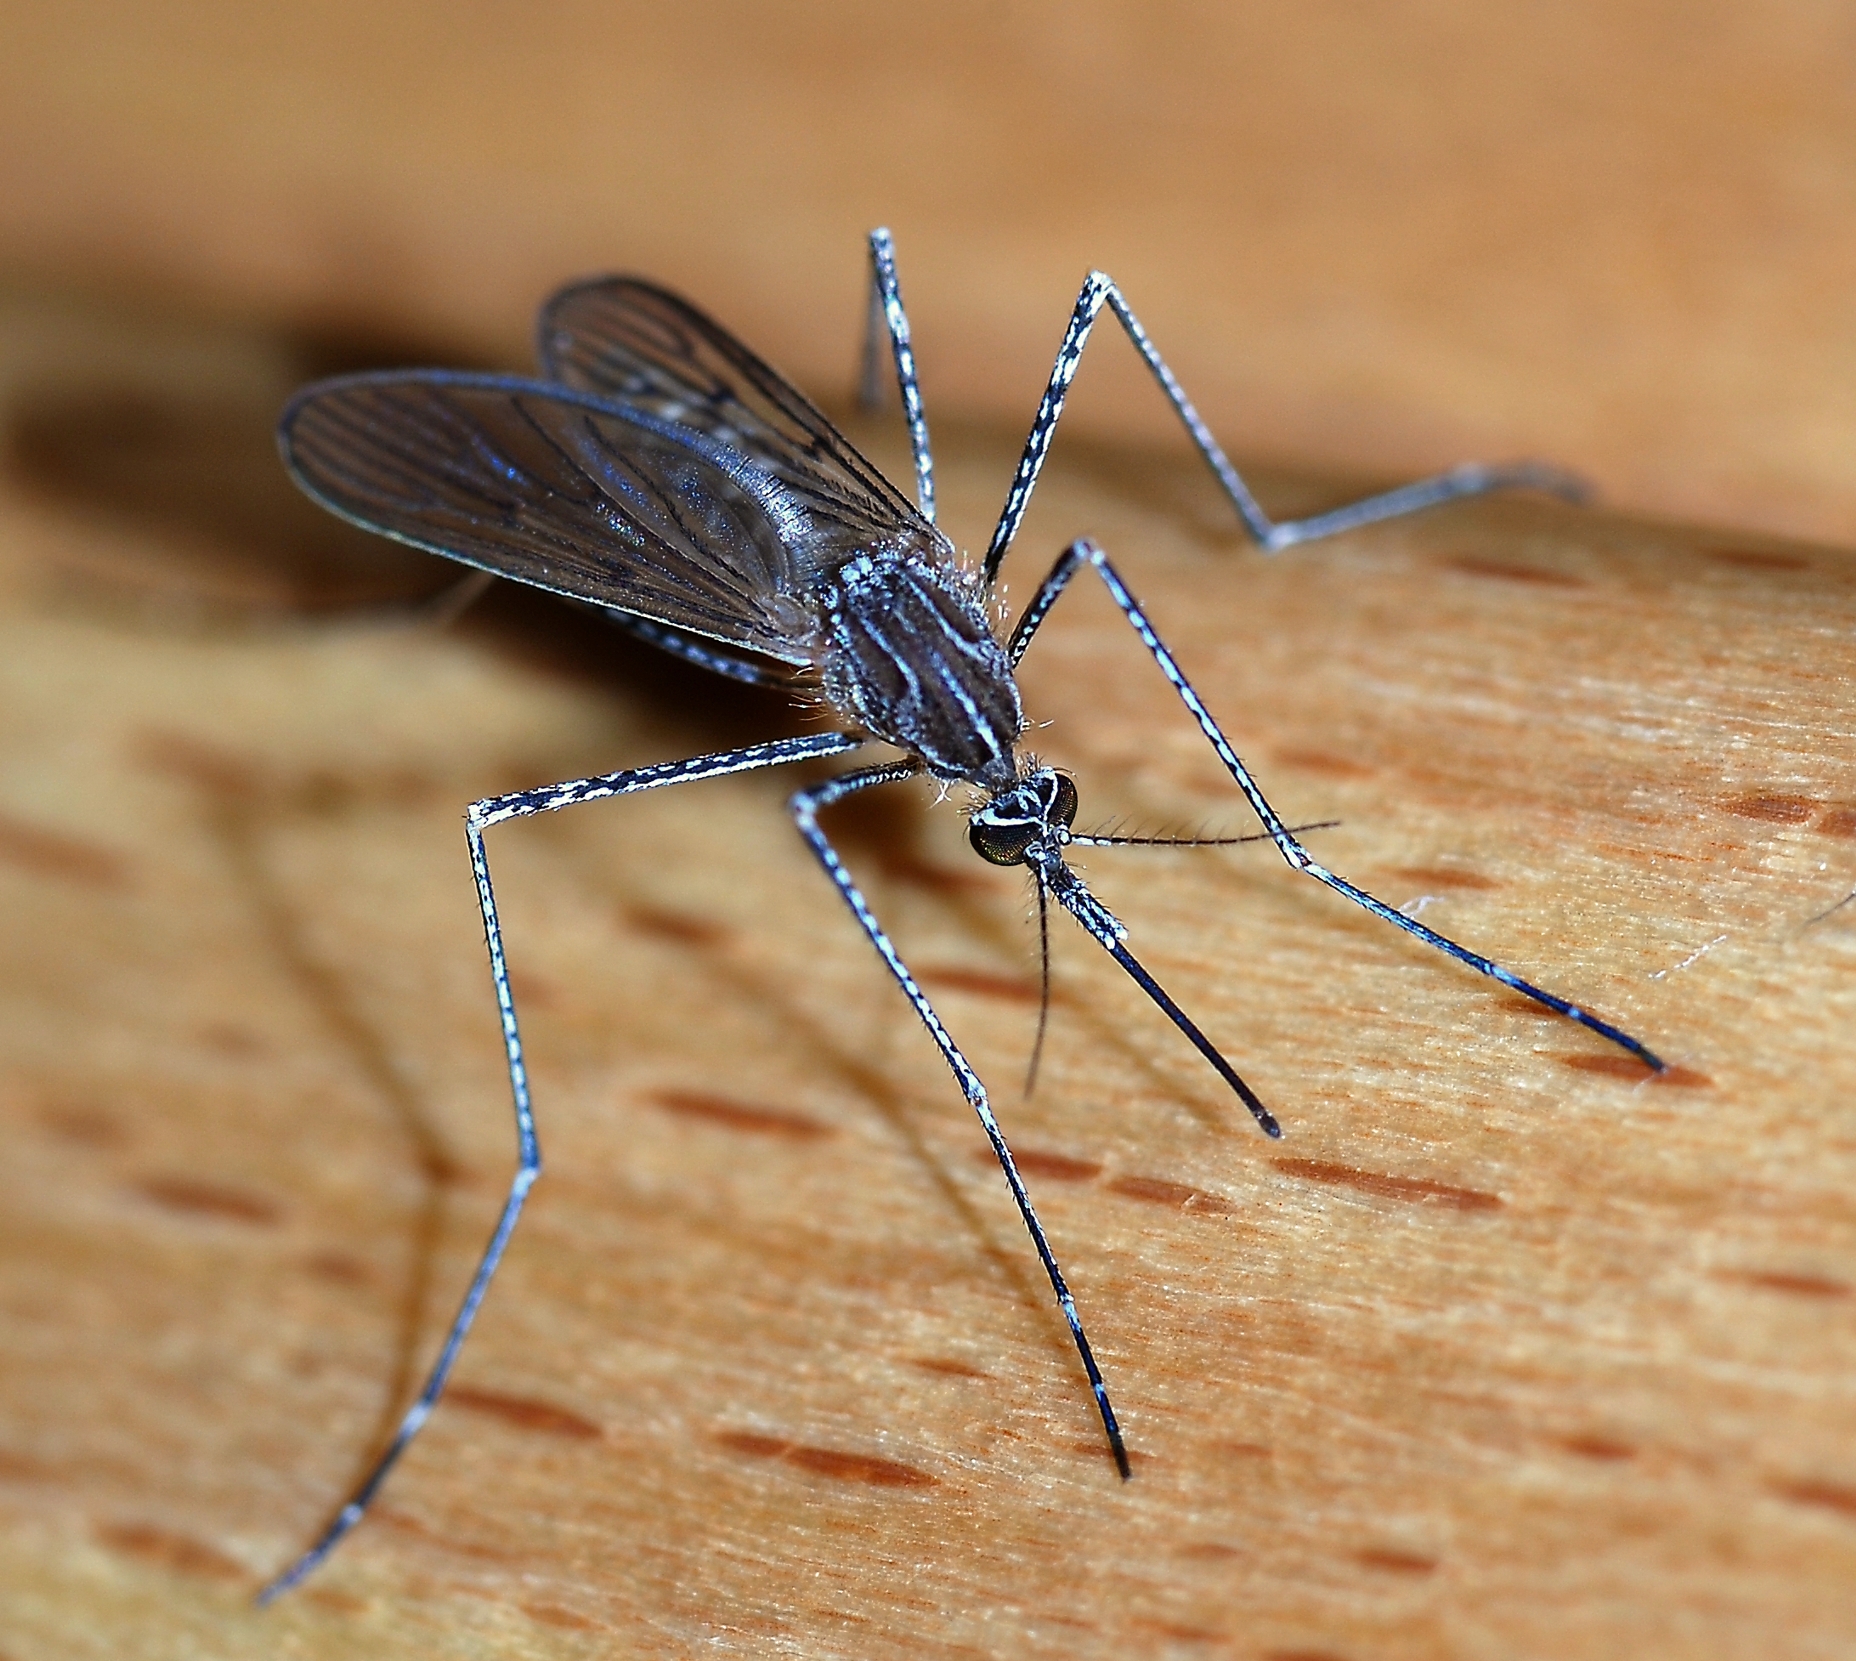 What type of legs do mosquitoes have?